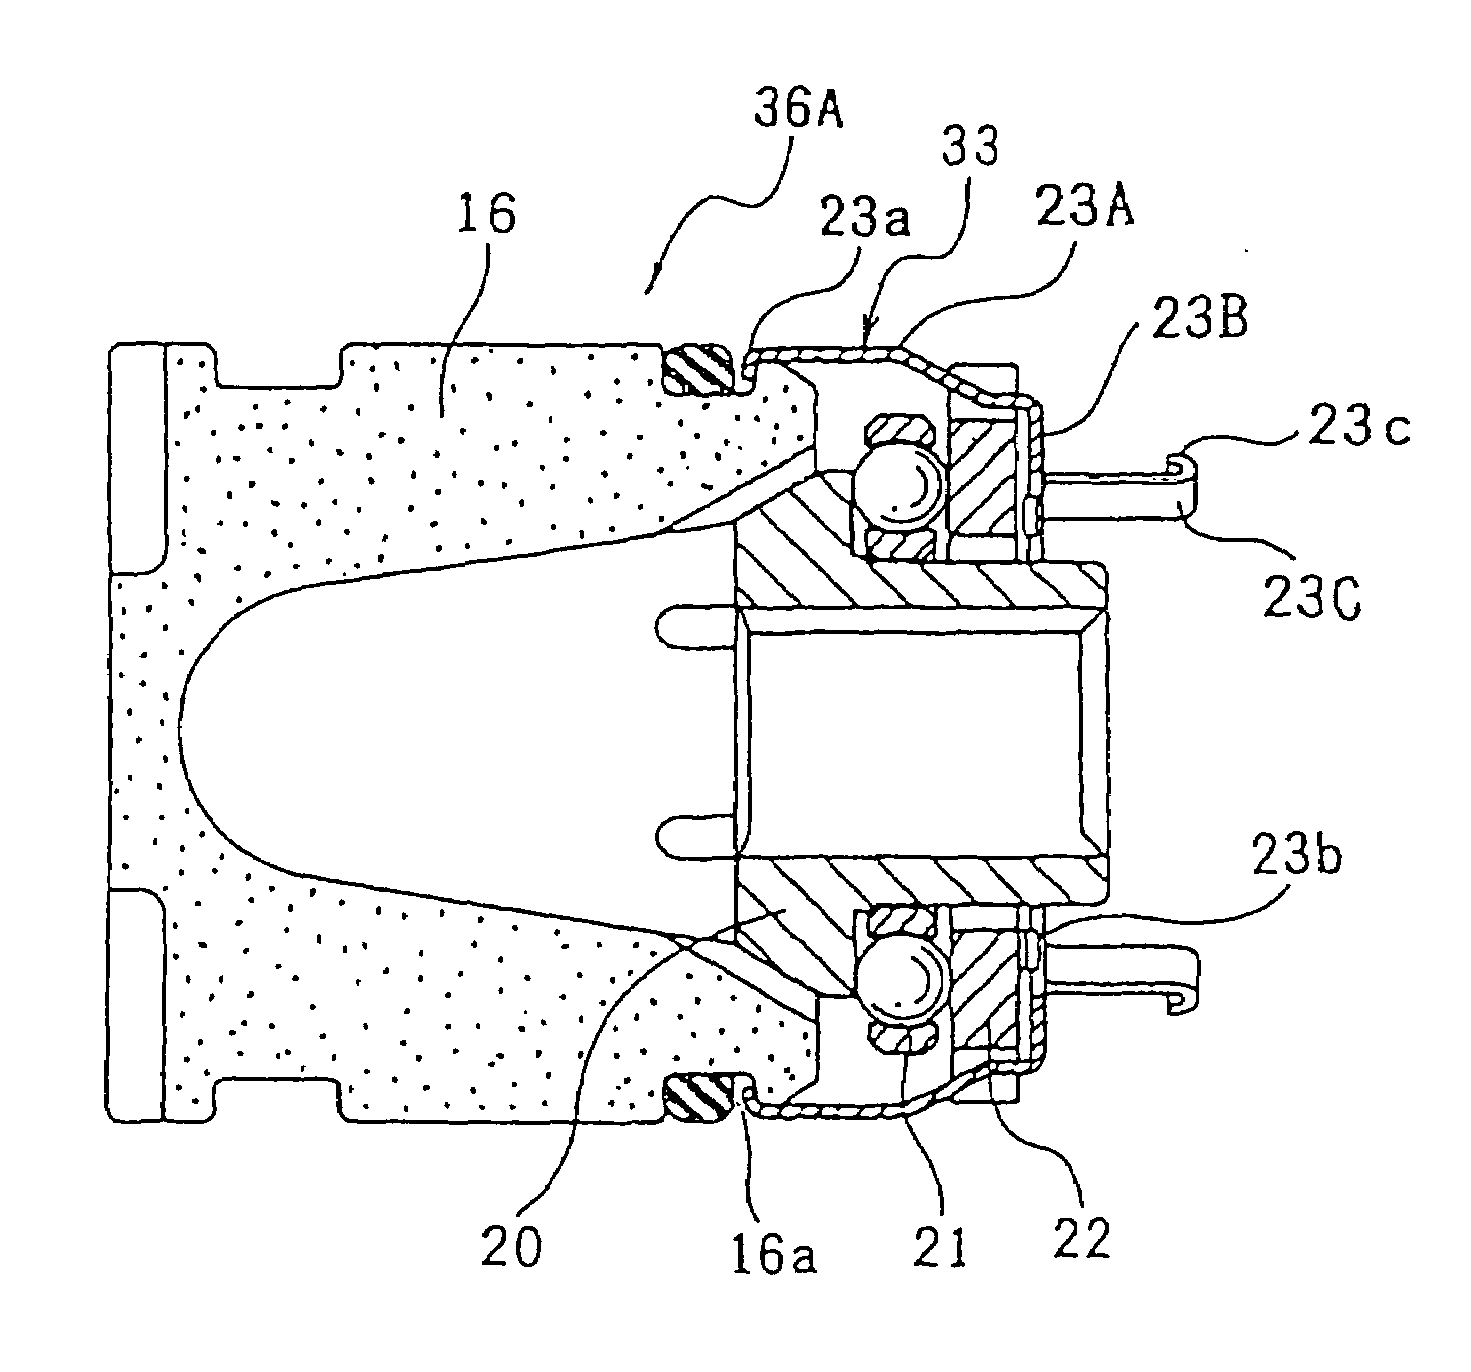 Brake apparatus having automatic clearance adjusting mechanism with overadjustment preventer